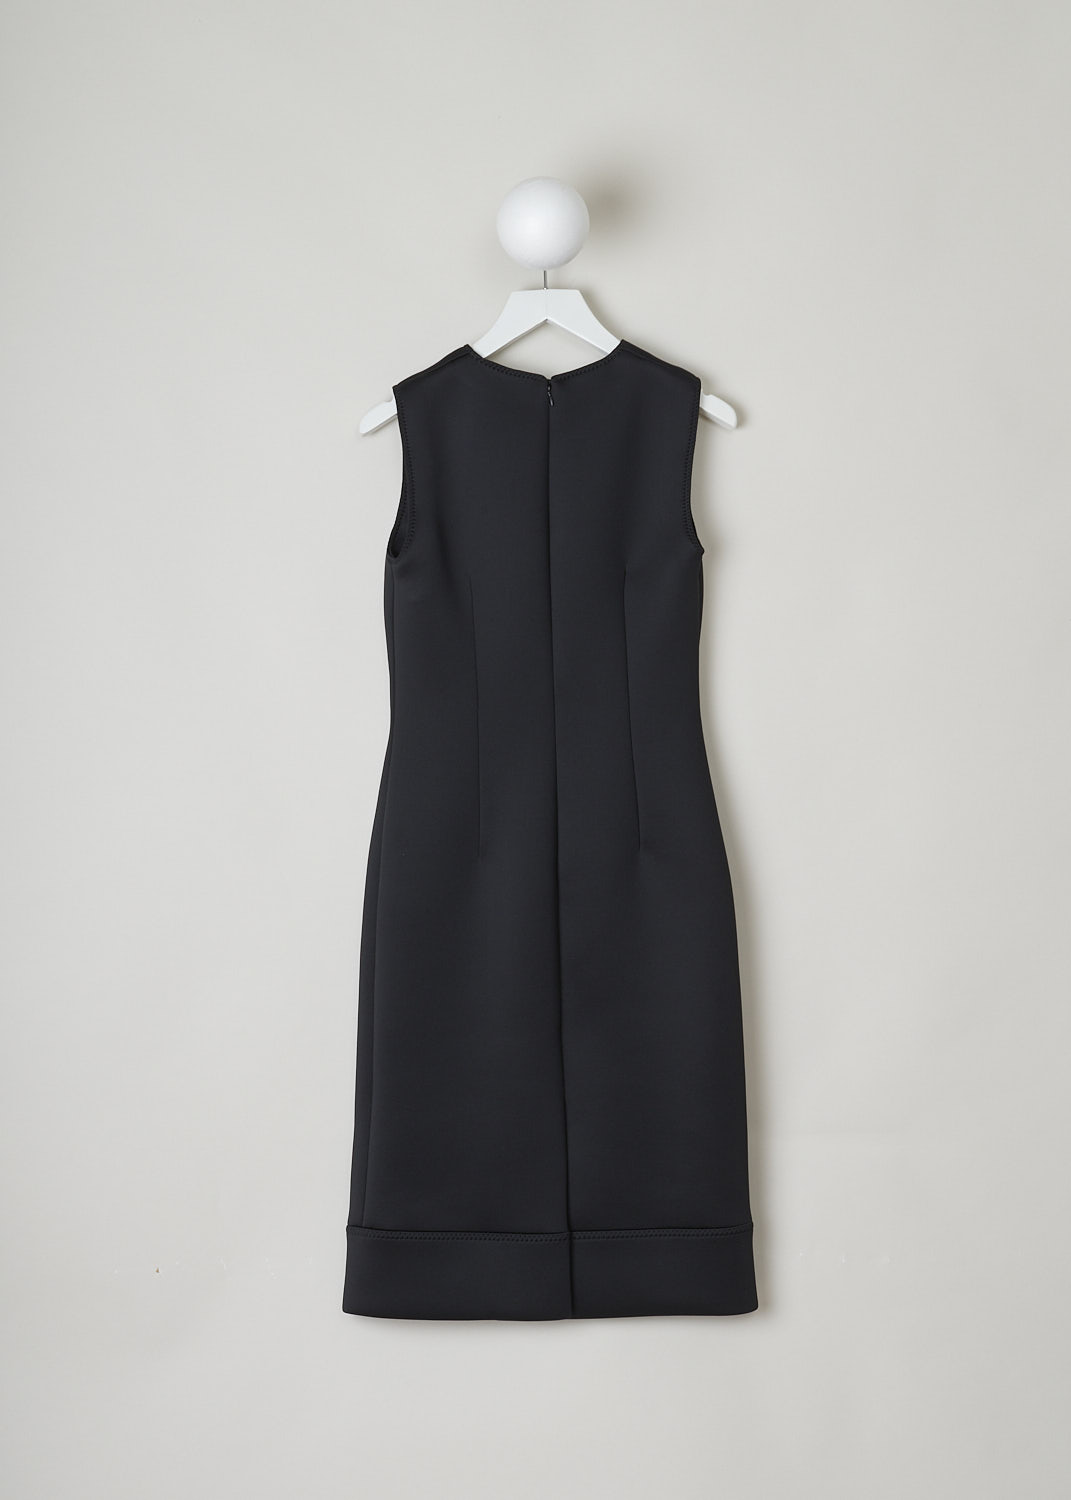 PRADA, BLACK SLEEVELESS SHEATH DRESS, P37H7_1SLI_F0002_JERSEY_DOPPIO_I_NERO, Black, Back, This black sleeveless sheath dress is made of a thick, neoprene-like fabric. This smooth, elasticated fabric hugs the body and is known not to wrinkles. The seams throughout the dress have a decorative zigzag pattern. The dress has a broad hemline. In the back, a concealed centre zip functions as the closure option. 
